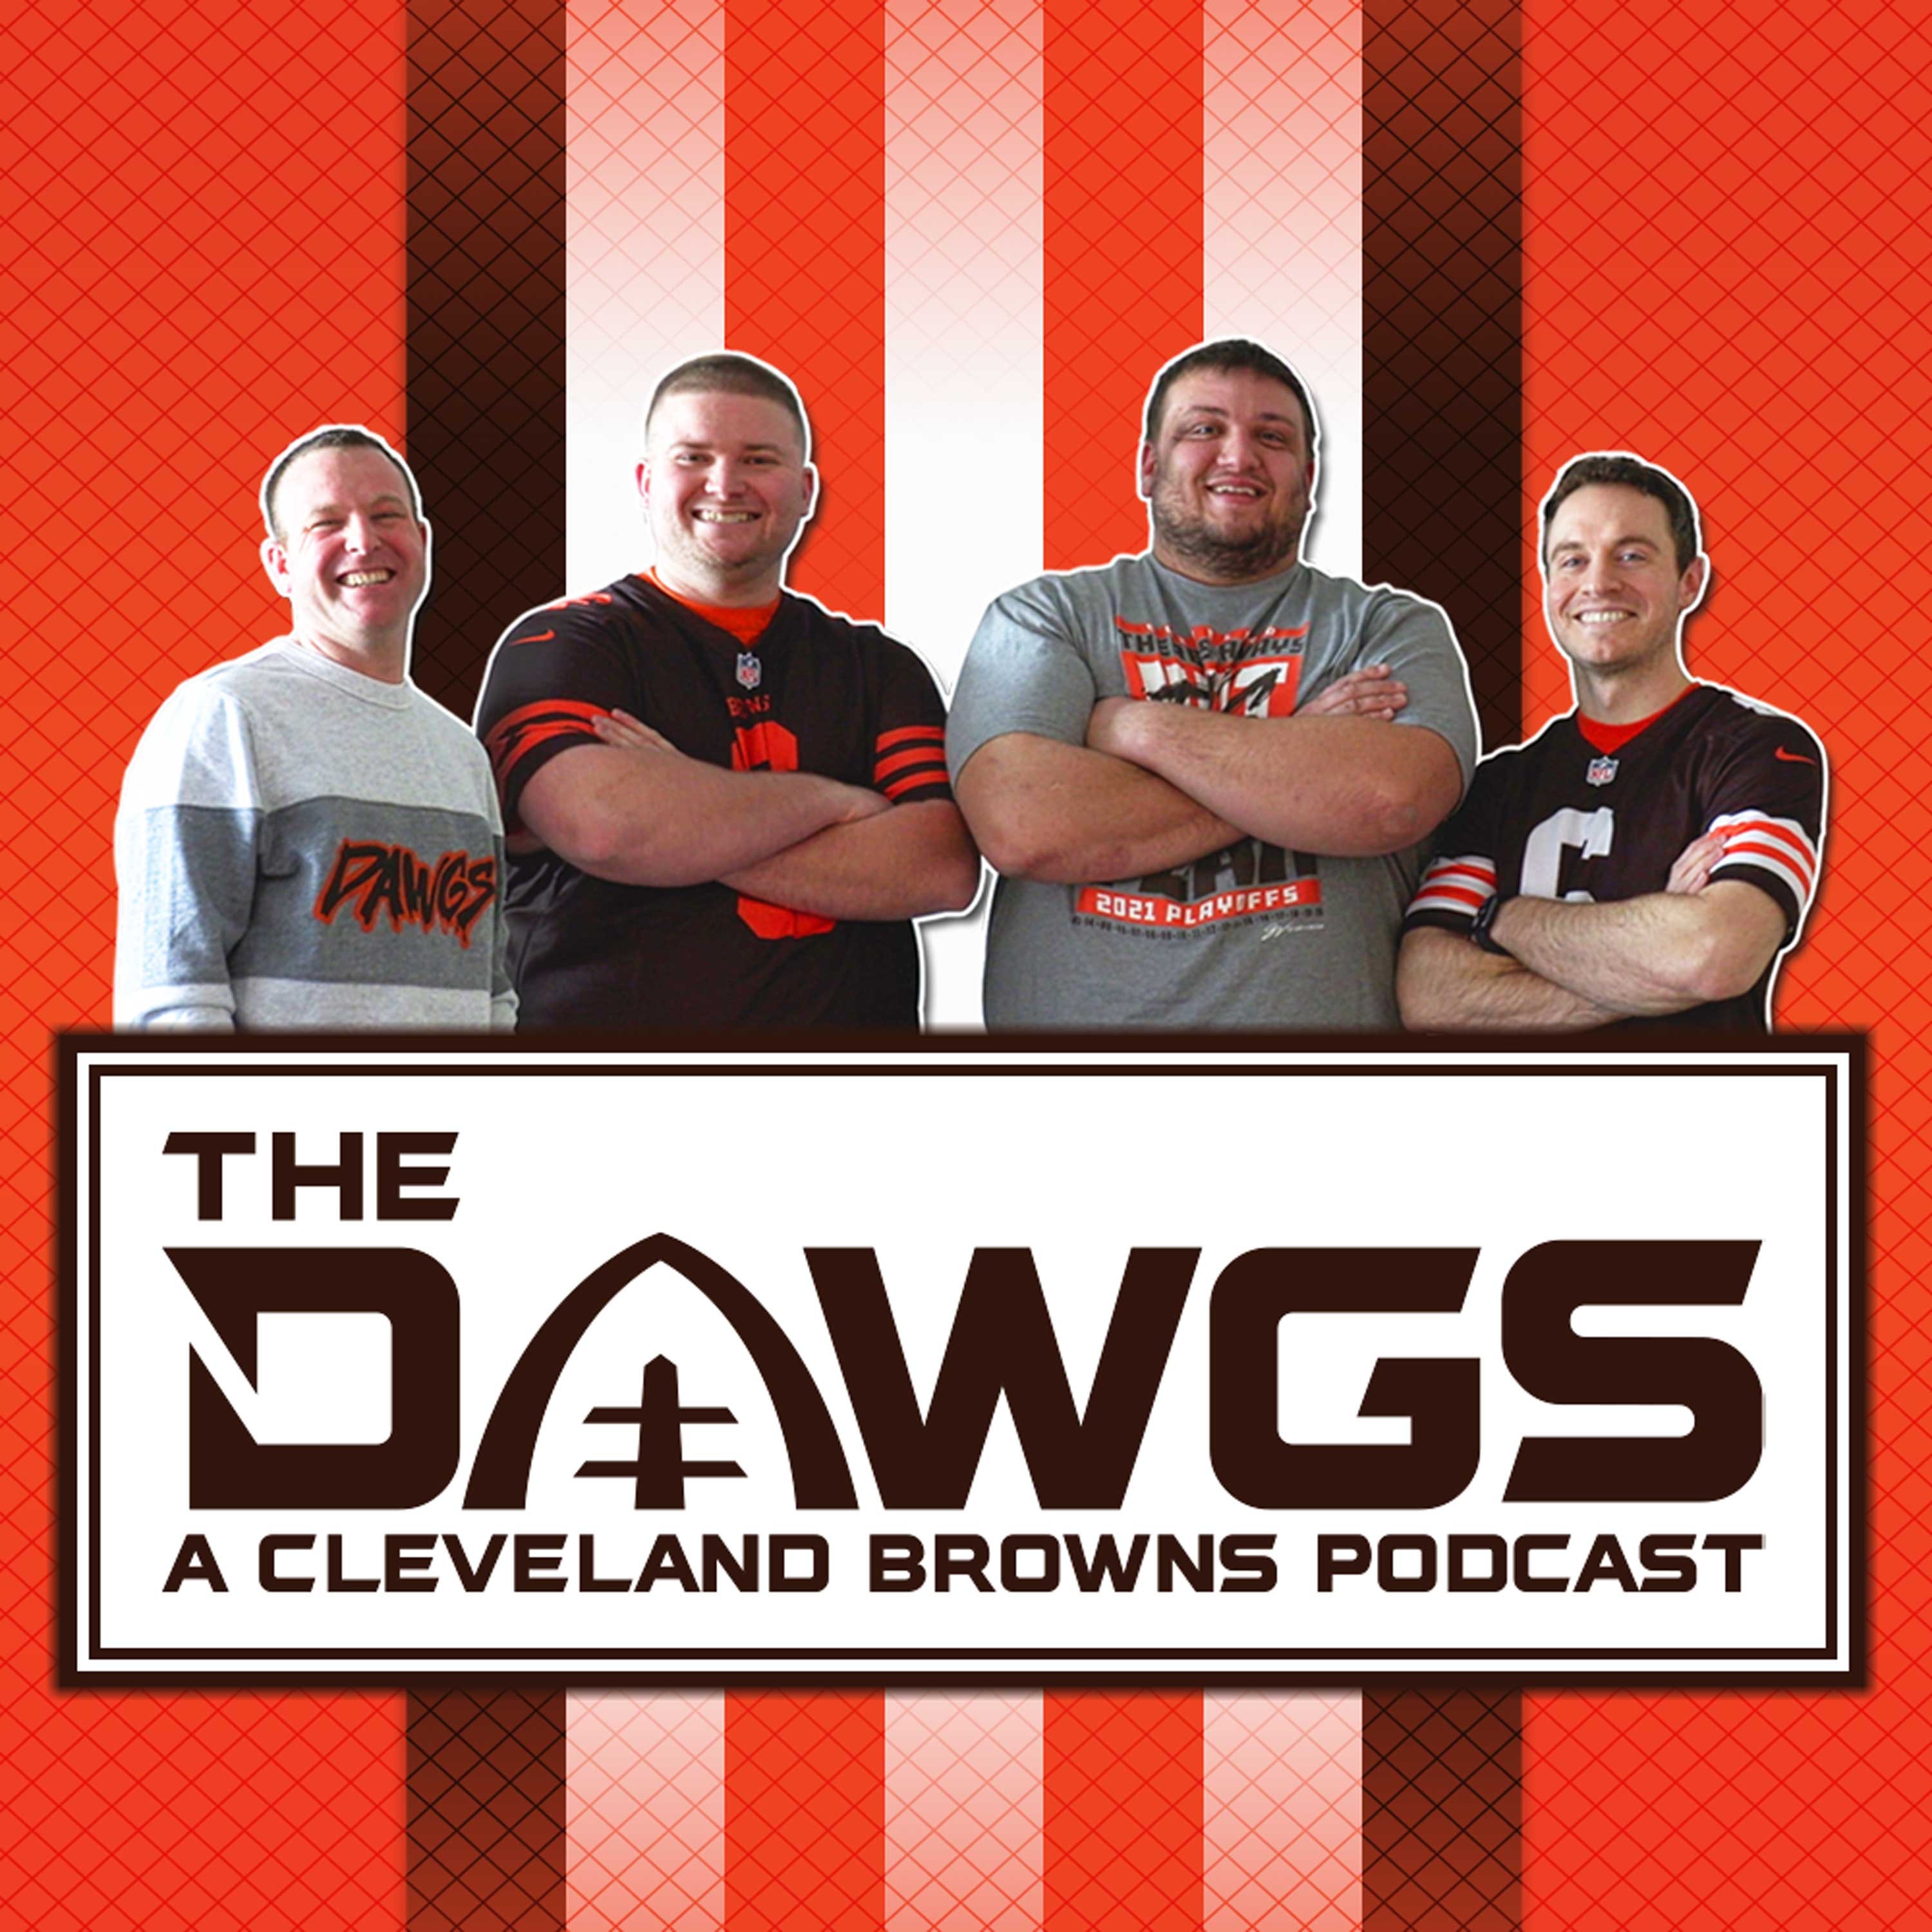 Part 1 - Browns Breakdown with Barry Shuck (Amari Cooper, Free Agents, and Draft Prospects) | The Dawgs - A Cleveland Browns Podcast - March 28, 2022